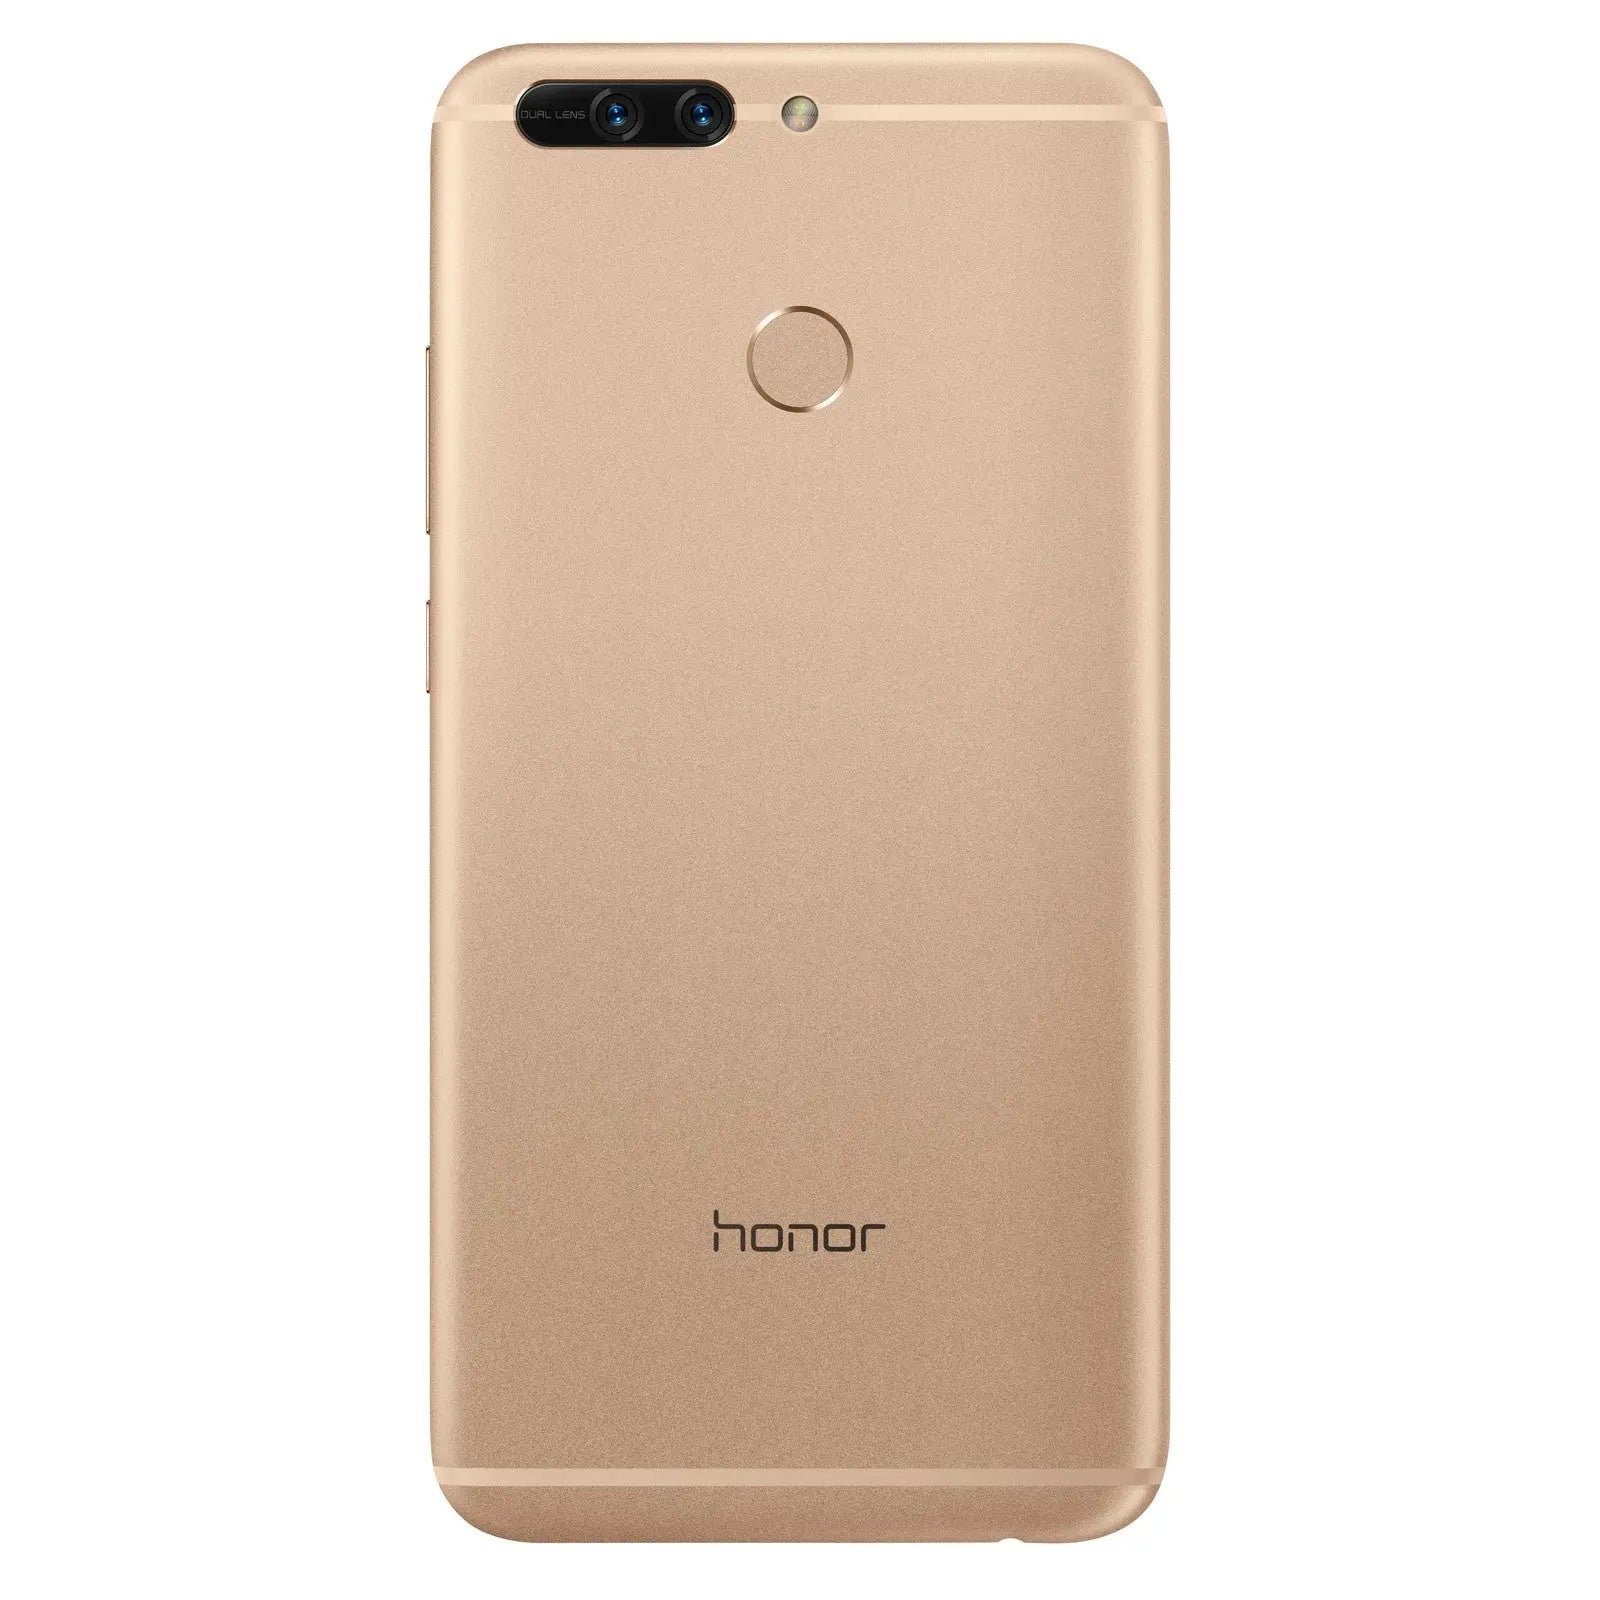 Smartphone Honor 8 Pro (  OR  ) android 7.0 Honor